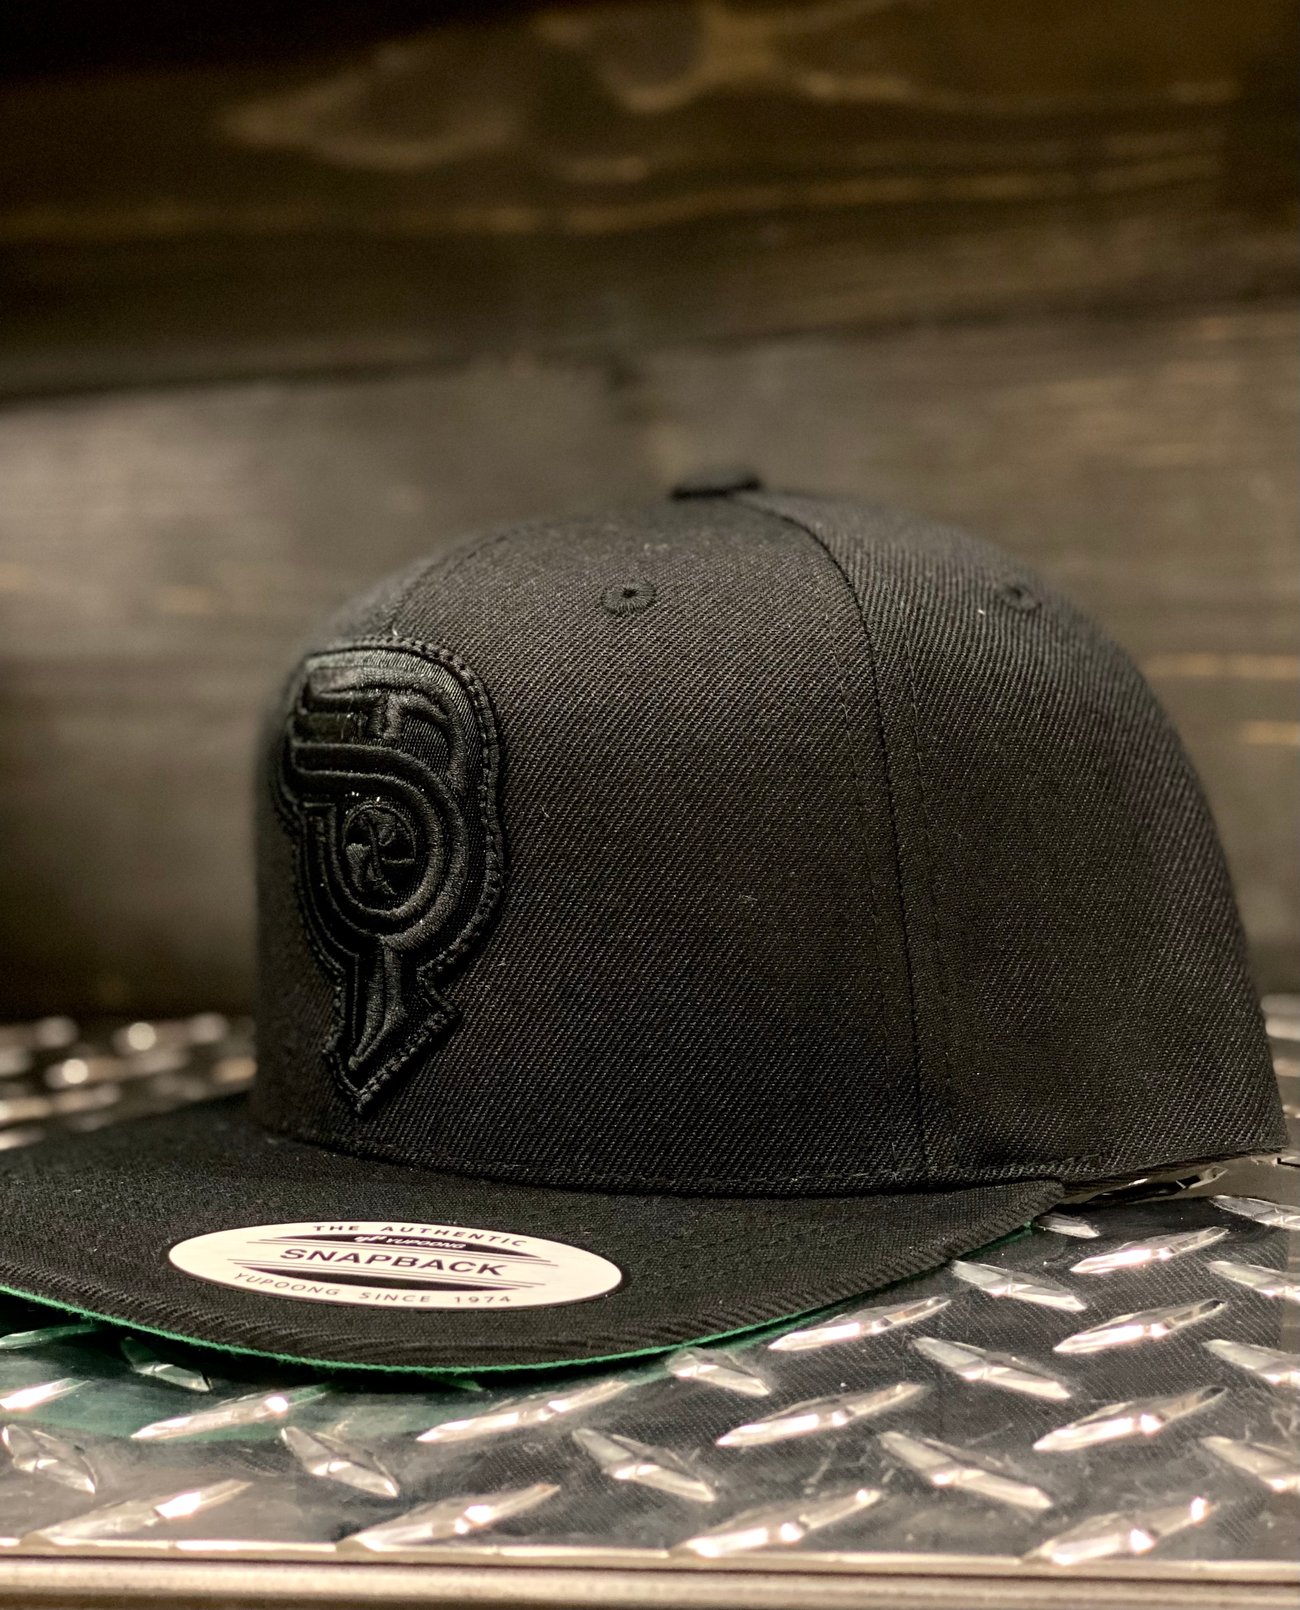 New Blacked Out Project Torque Logo Cap | Project Torque